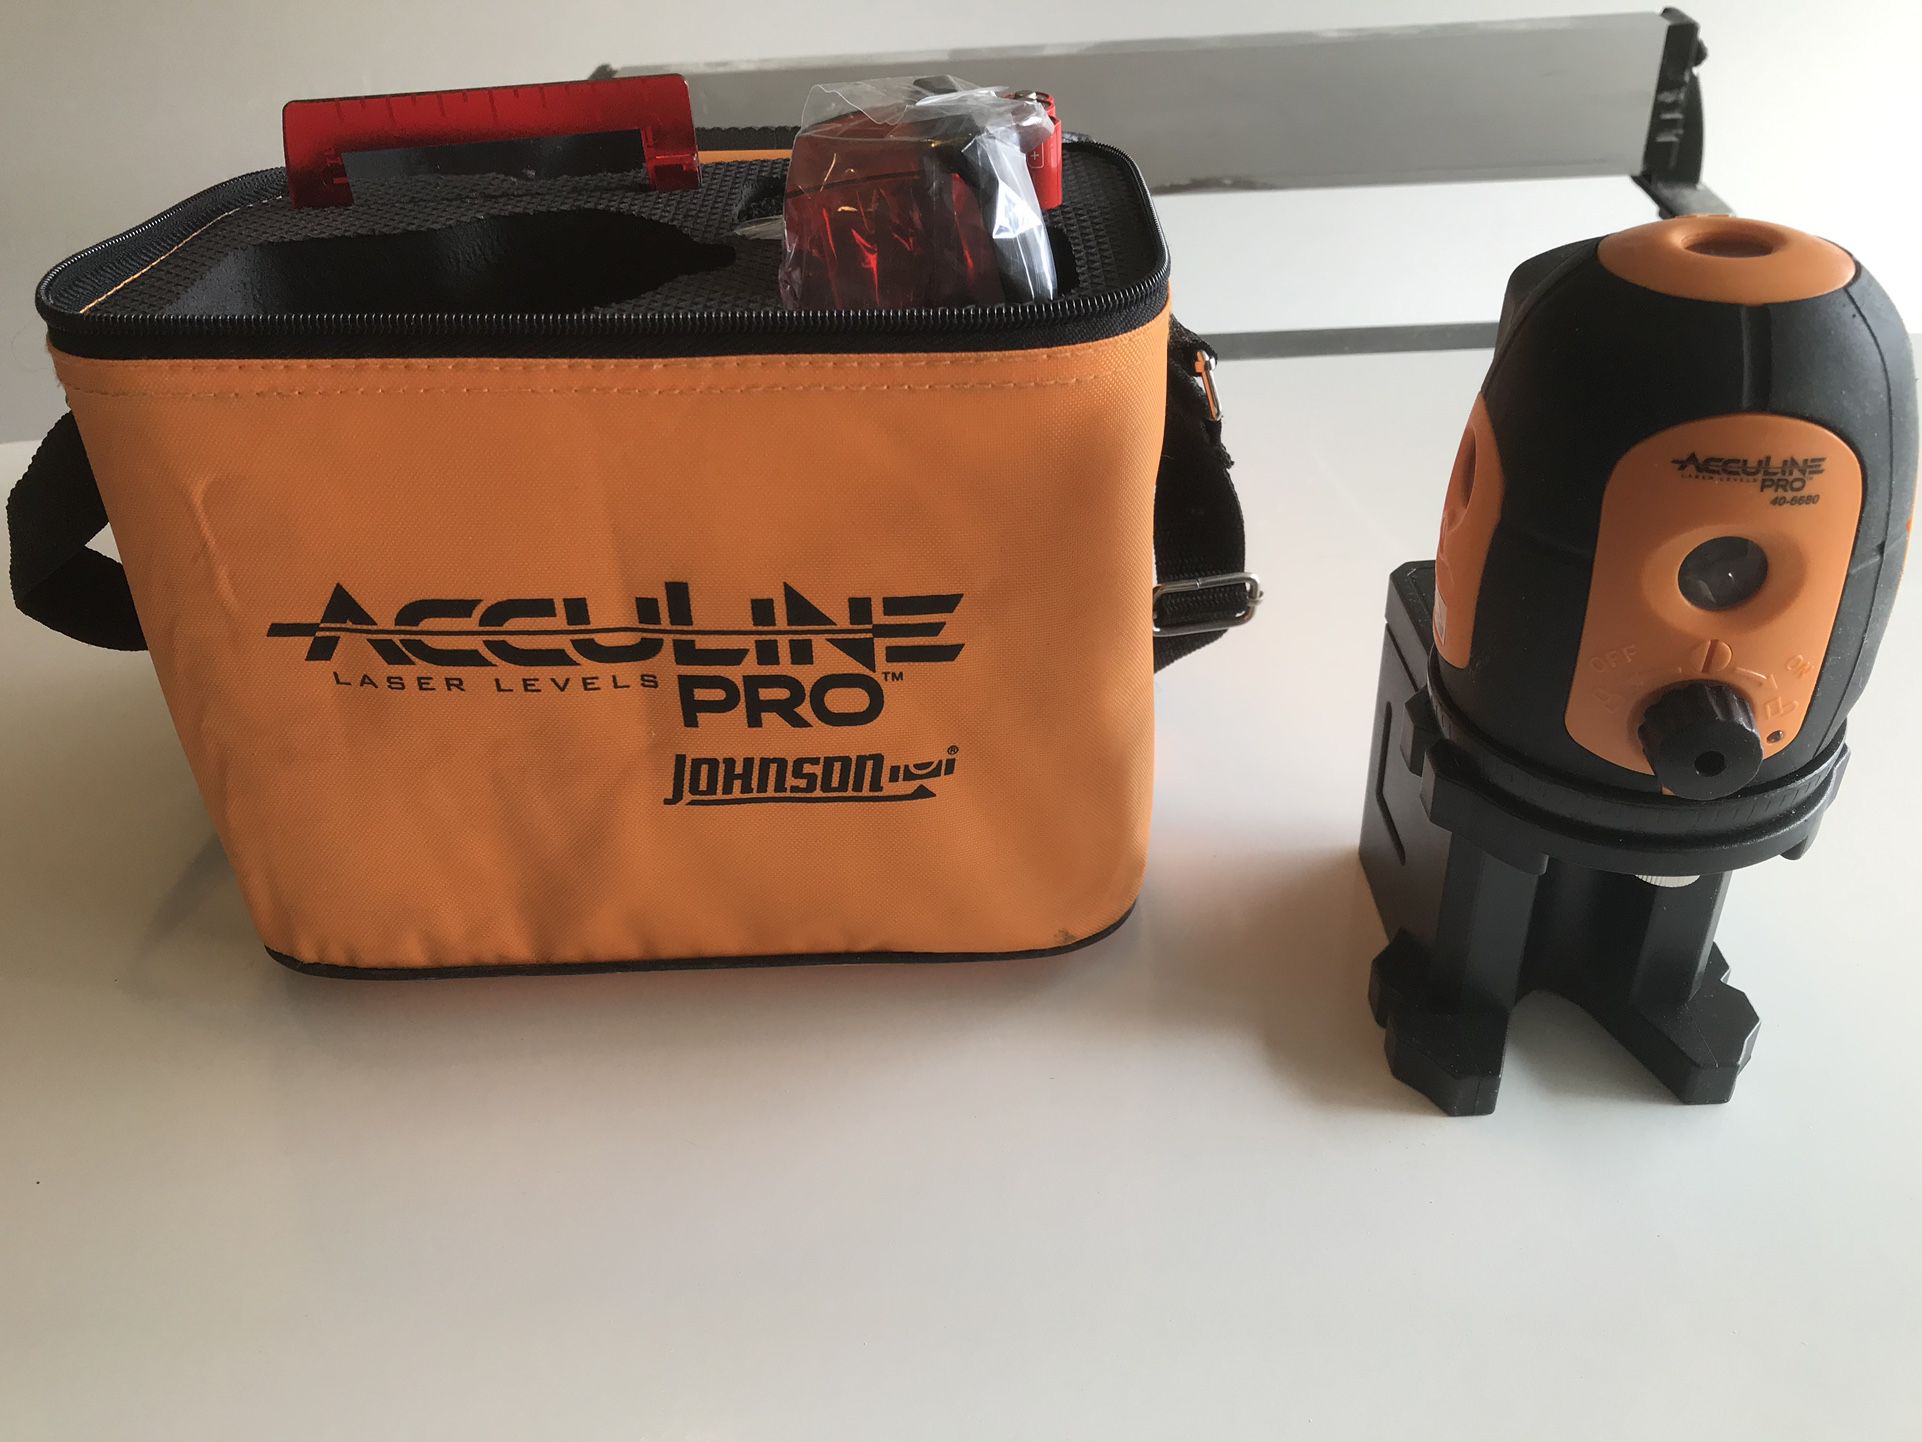 How To Open An Acculine Laser Level